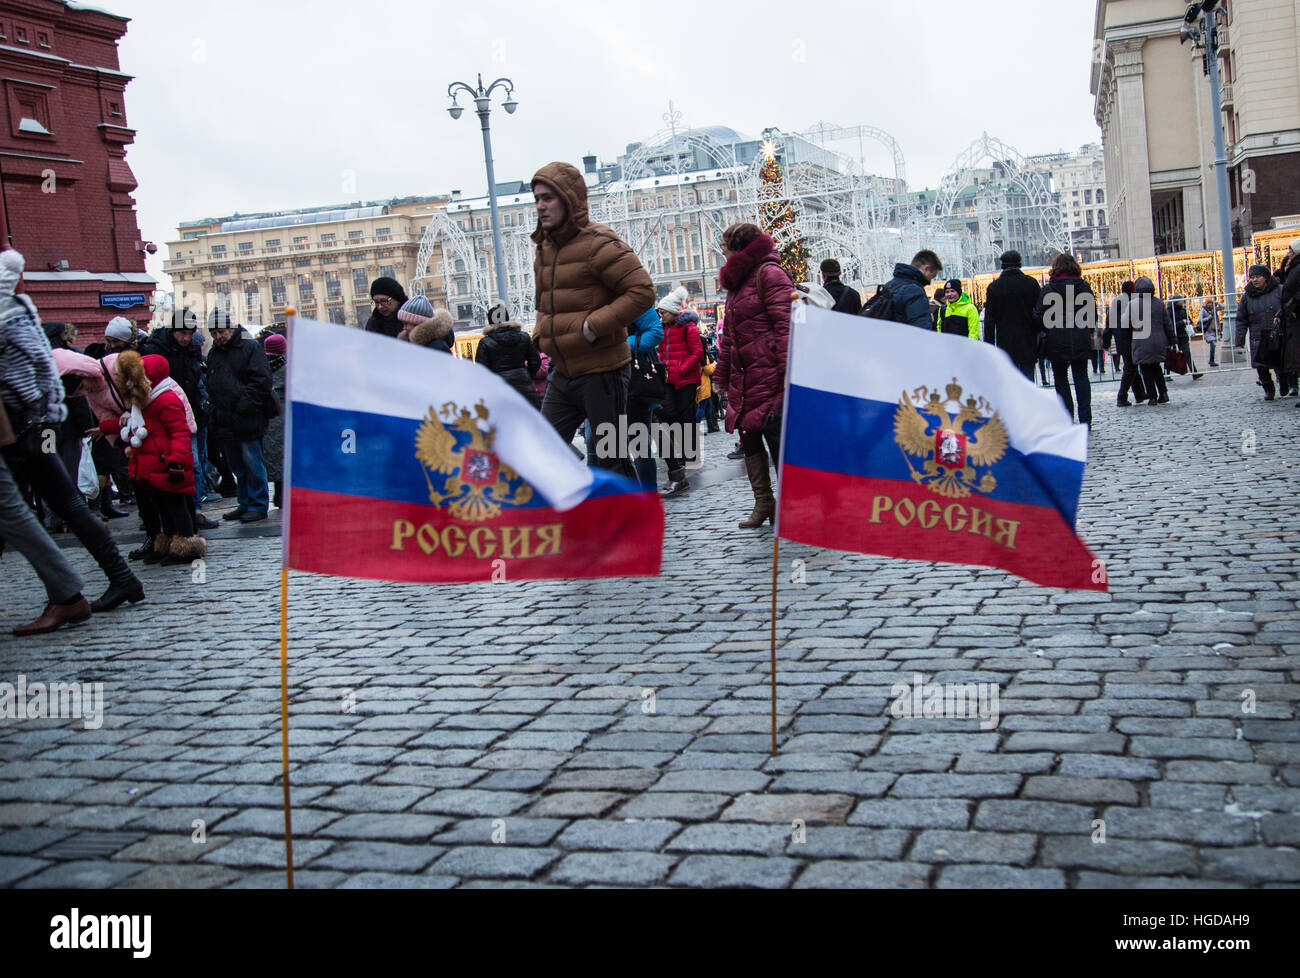 Russia Flags inserted in the paving stones near Red Square Stock Photo